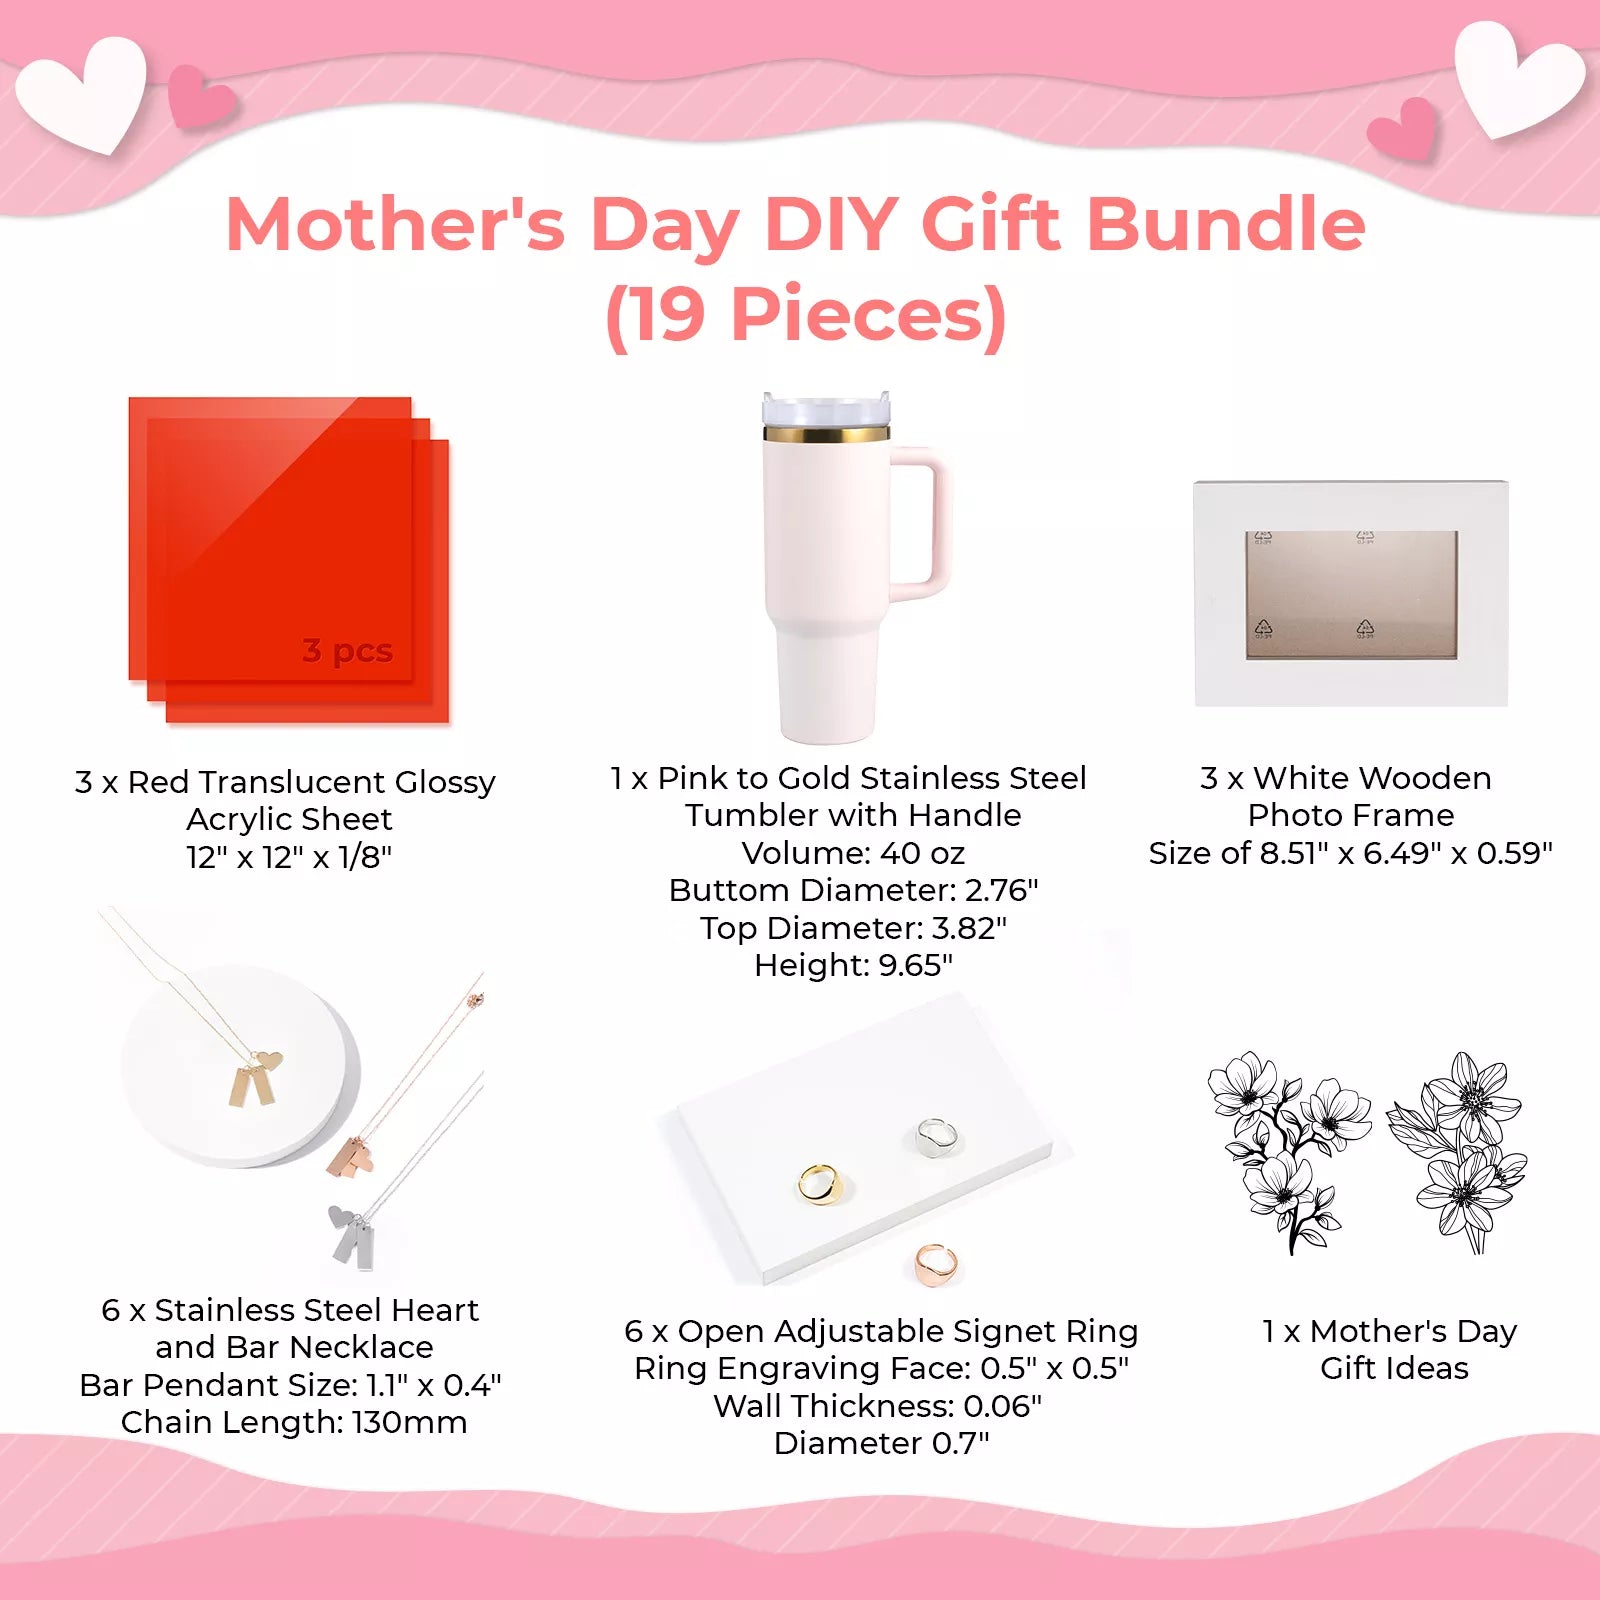 Mother's Day DIY Gift Bundle (19 Pieces)